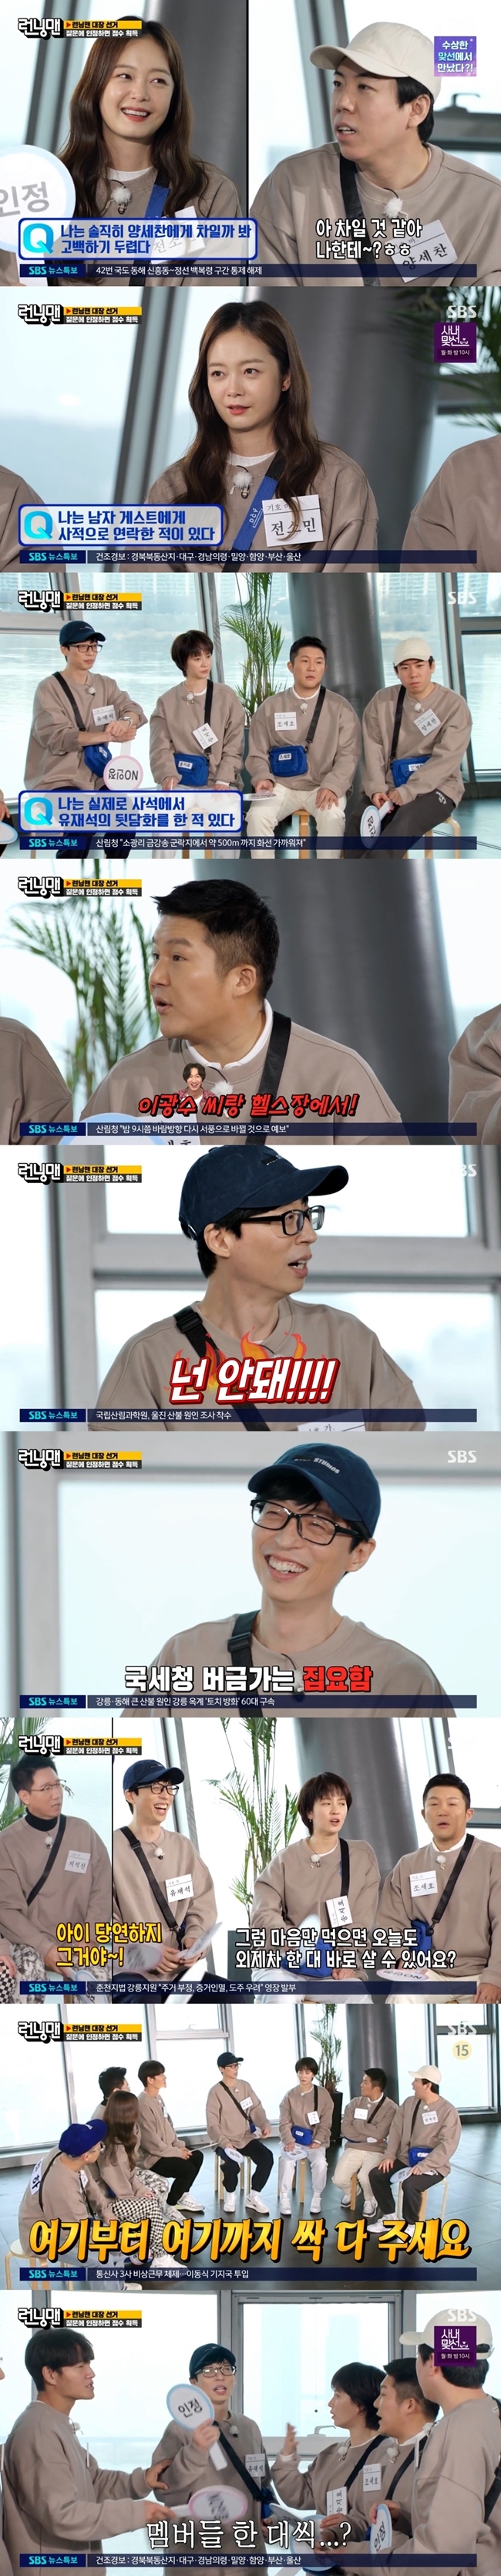 Broadcaster Yoo Jae-Suk coolly admitted to being rich.On March 6, SBS Running Man, Jo Se-ho appeared as a guest, and the Running Man general election race was held.If you are selected as a captain through the Captains Election Race, you will be named in front of Running Man, and the age notice shot will also go out exclusively.Lunch menus can be selected without any limit for a month, and luxury bottled water is paid separately.But after glory, responsibility follows. During his term, he must take responsibility and participate in the production meeting.The first game is a calm game; the first runner is Jeon So-min.When asked Im afraid Im going to confess to Yang Se-chan, Jeon So-min vehemently denied: No.When the other members told me to admit to the score, Jeon So-min said, I do not like it because it is a car, but I do not like it that much.He also denied the question of whether there was a male guest who contacted him privately after filming Running Man; Jeon So-min laughed, I never got a real number.When Jeon So-min admitted to being more ignorant than Yang Se-chan, Yang Se-chan provoked: Are you stoneheaded than me?On the ensuing provocation of Yang Se-chan, Jeon So-min lost his composure and ran into a runaway laugh.Jo Se-ho quickly admitted the question: Ive had Yoo Jae-Suk gossip in private.I have told Park Jae-seok that his brother is uncomfortable at the gym with Lee Kwang-soo.Park Jae-seok may be uncomfortable when a person lives. It also admitted the question: Song Ji-hyo and Jeon So-min are both not in the castle. Jo Se-ho said: I have my baseline too.Ji Suk-jin, who heard this, said, What are you, my sisters are not in the castle. Yoo Jae-Suk grabbed Jo Se-ho, saying, Do not do it to my sisters.If a person says he is dating you, he will not stay still. You can not, he shouted.Yoo Jae-Suk coolly admitted the question: I have a lot of money, and when asked to tell me how much Yang Se-chan is, Yoo Jae-Suk said, Tell me about property?Jo Se-ho, who was next to him, said, There is as much as the prize money of Squid Game. Yang Se-chan asked, I went shopping and I love it so much - Ill give you all the buds from here to there.When Yoo Jae-Suk hesitated, Kim Jong-kook asserted, It is also a luxury C company.When Yoo Jae-Suk refuted, No, its my property, Kim Jong-kook shouted, I can count it.When the members asked persistent questions to infer property, such as I can live in my 30s, Yoo Jae-Suk said, The rich are right.If Im not rich, others will swear. However, when the members poured out unfounded rumors, Yoo Jae-Suk heard Noh In-jeong.Ji Suk-jin said, Hes a go-go girl, and Yoo Jae-Suk shouted, What? Get a better car than you.